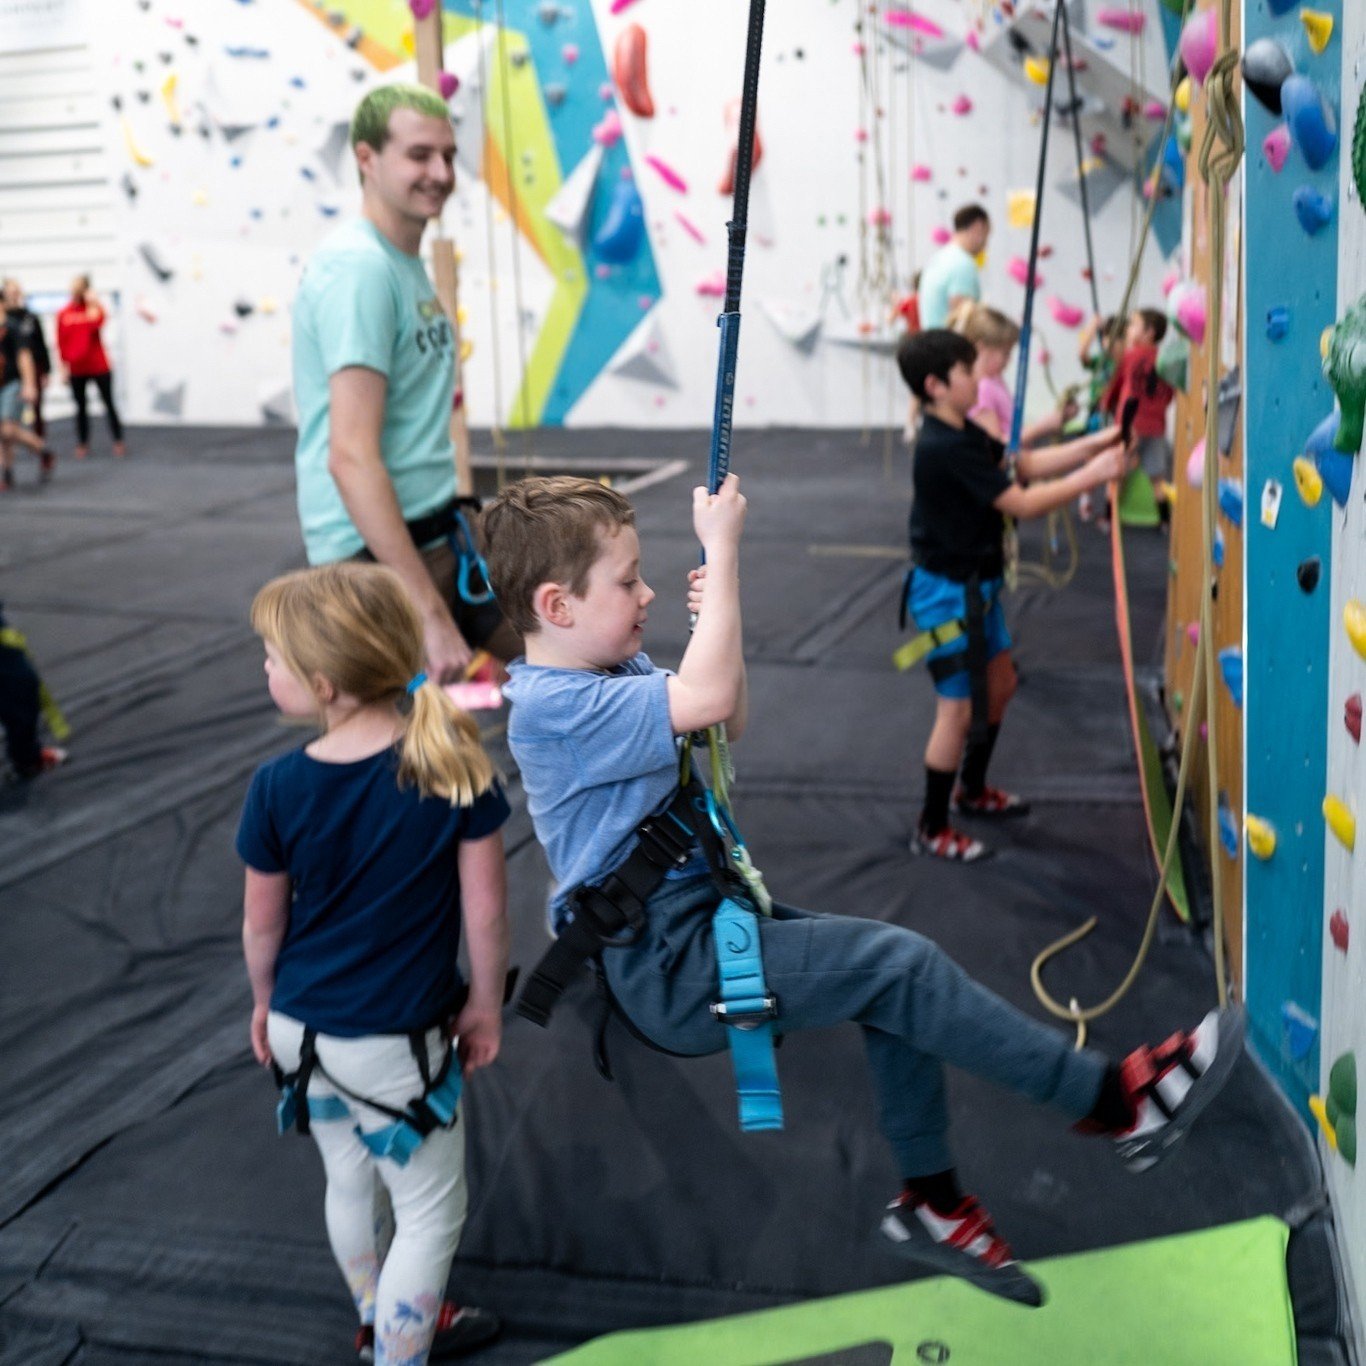 Looking for a great activity to keep the kids busy this summer? Our summer camps are great for kids to learn new skills, meet friends, and hopefully spark an excitement for climbing! 

Our well trained staff will help your kids conquer new heights! W